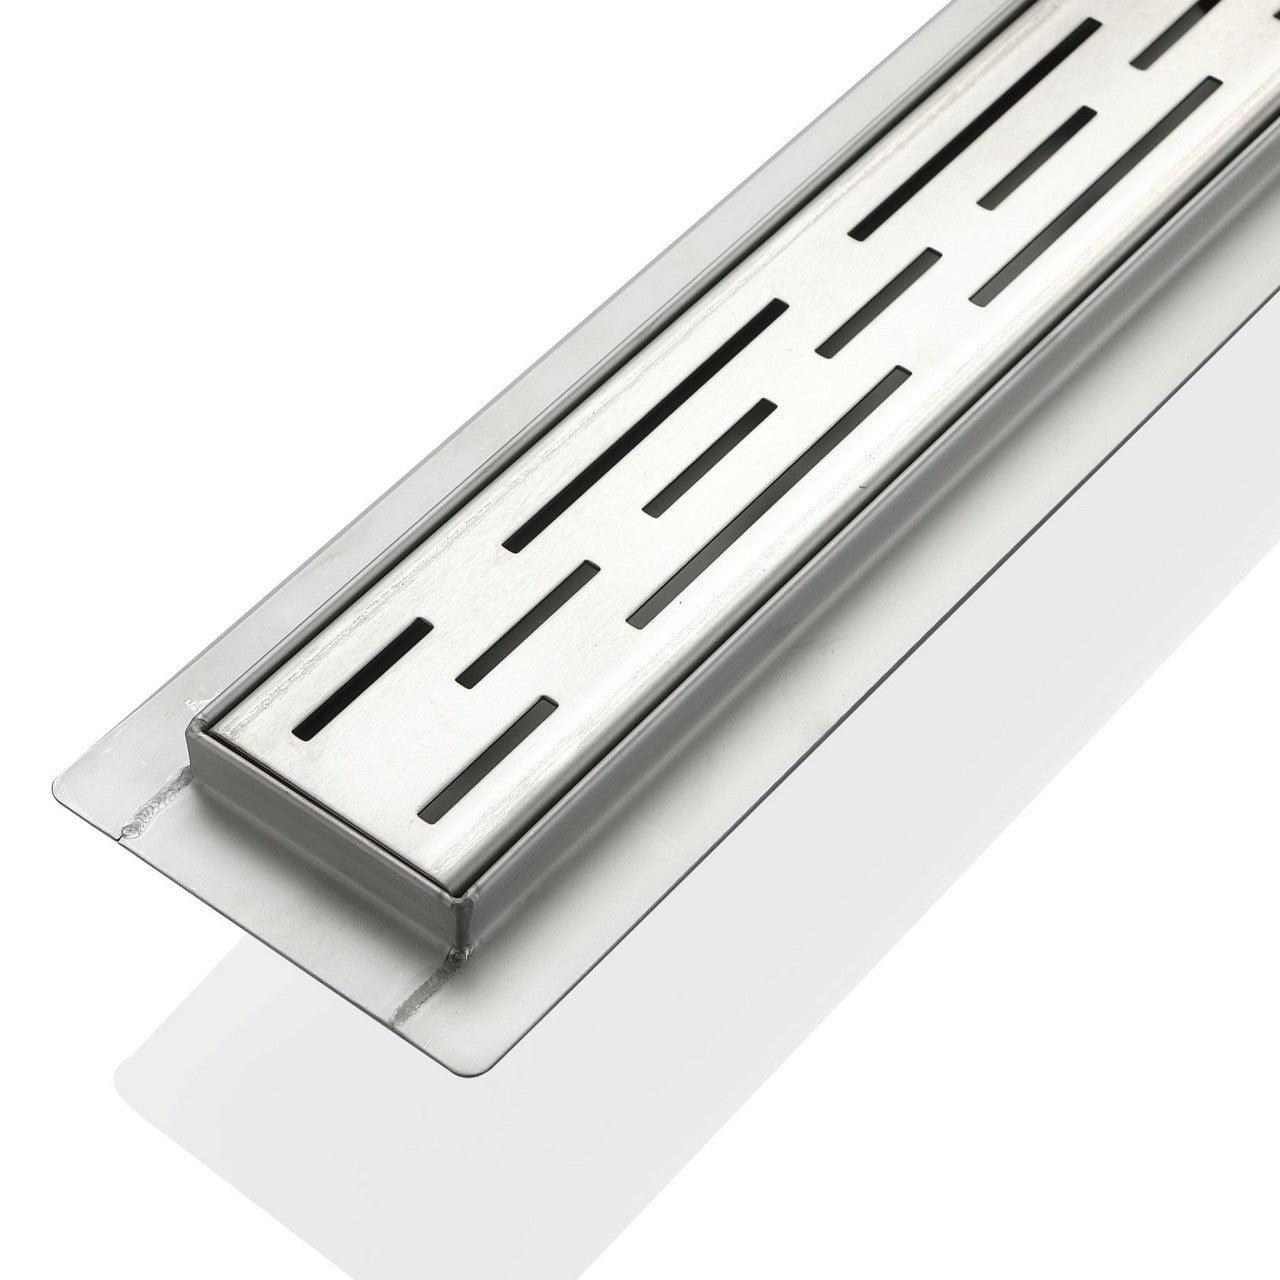 Kube 47.25" Linear Drain with Linear Grate - Hbdepot